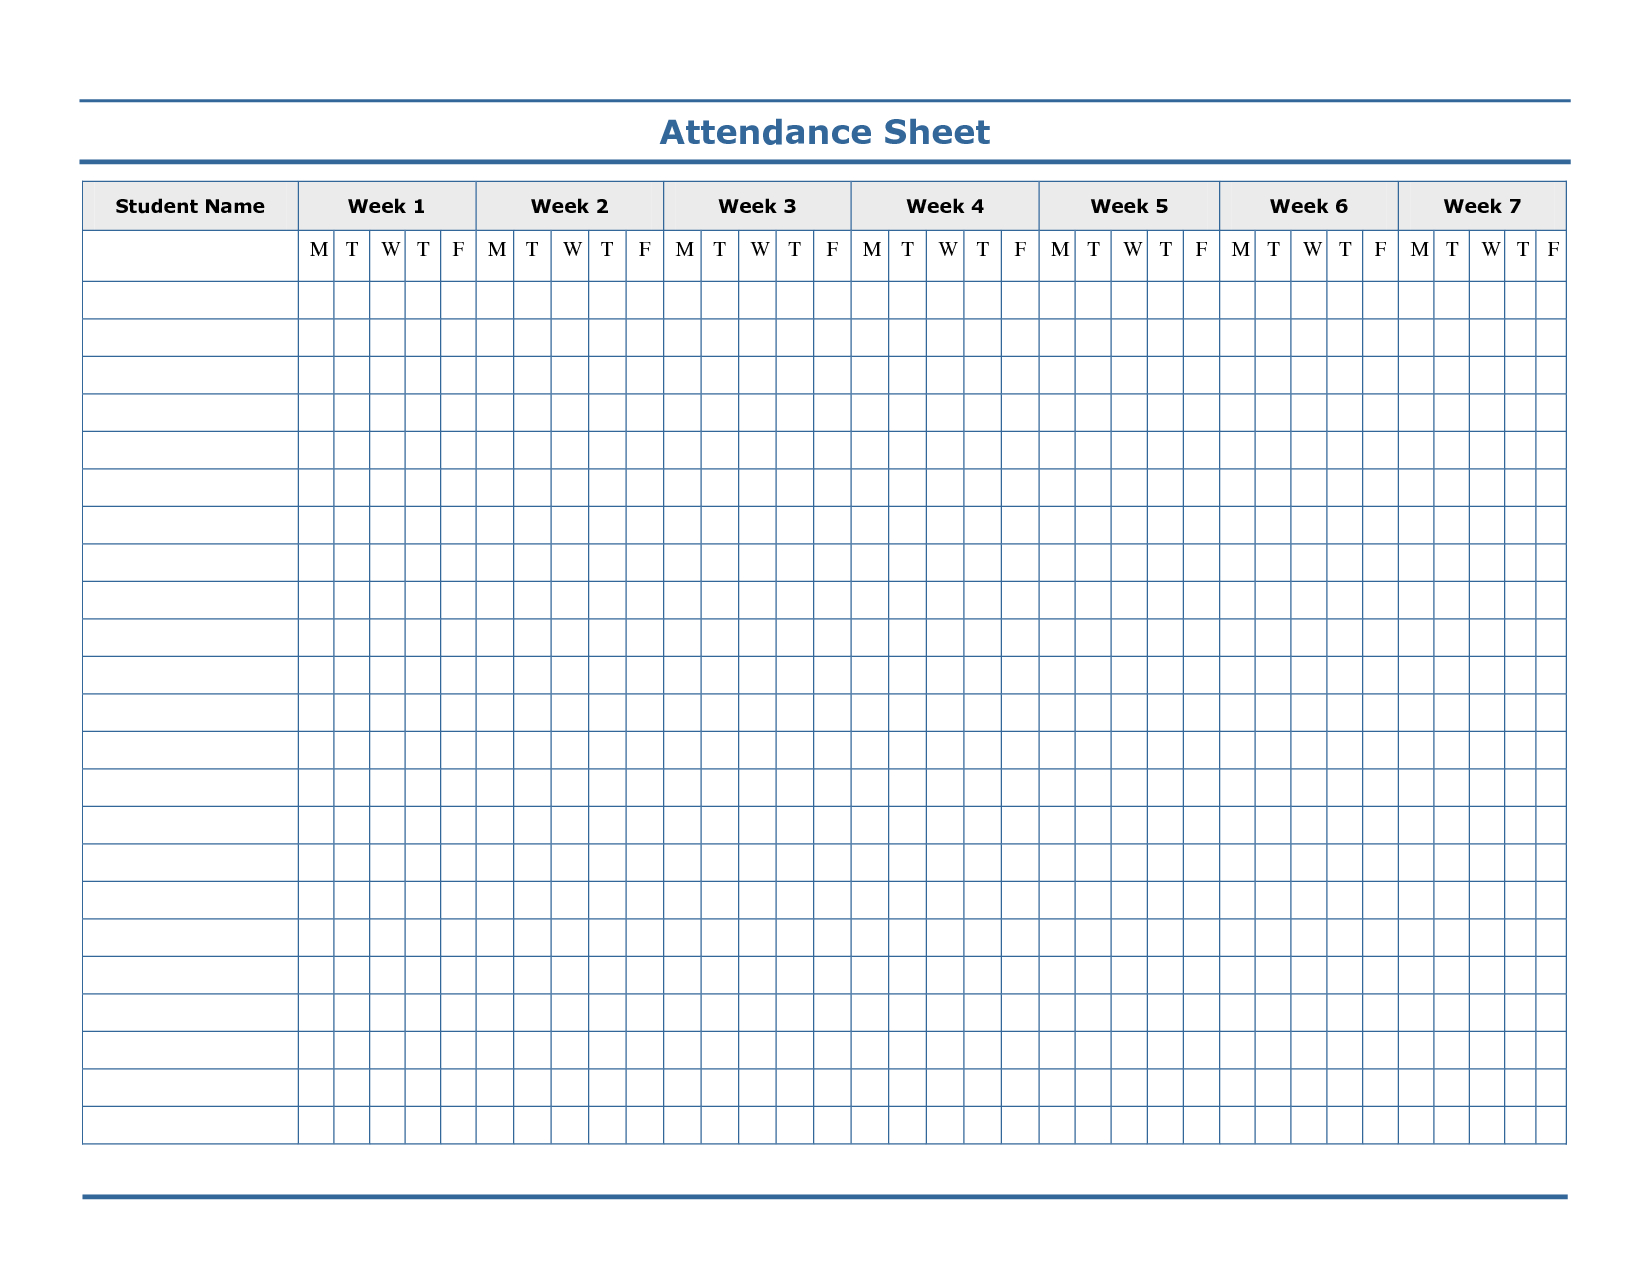 Free Printable Blank Attendance Sheets | Attendance Sheet - Free Printable Attendance Sheet